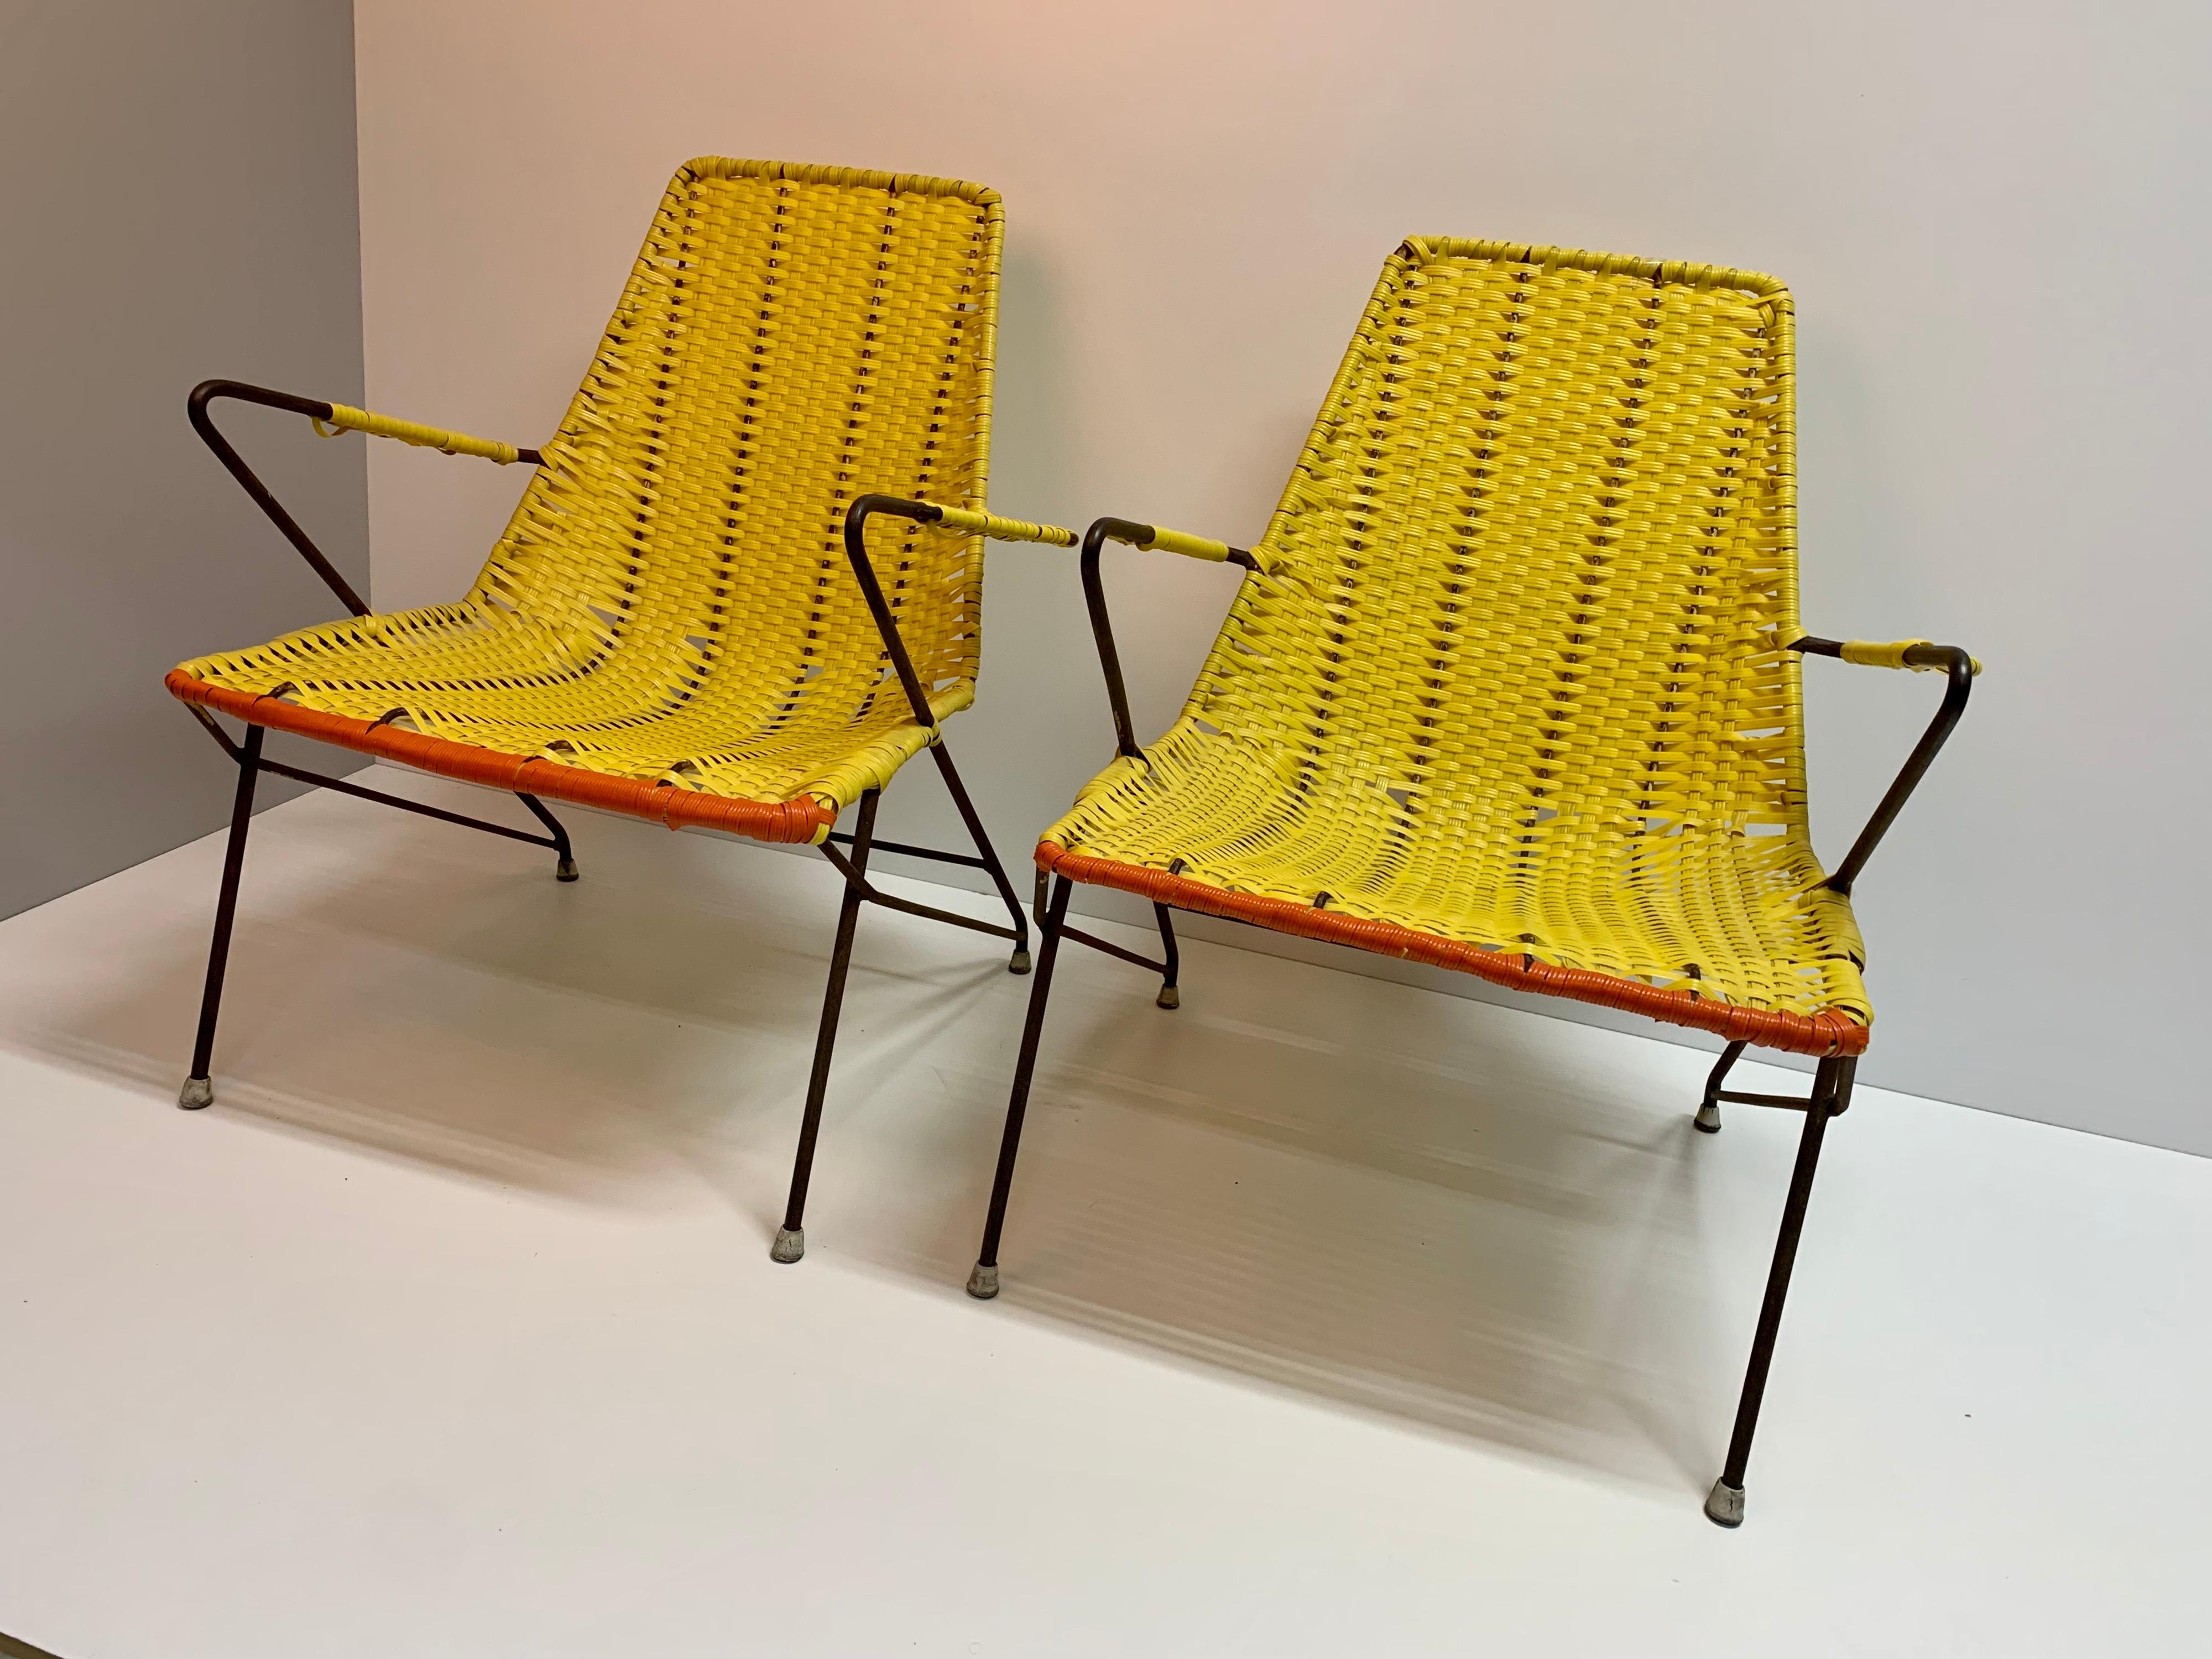 Iron and pvc wire chairs, the seat and backrest are handmade with pvc wire, the patina iron is original and, the original vintage finish of the legs looks great.